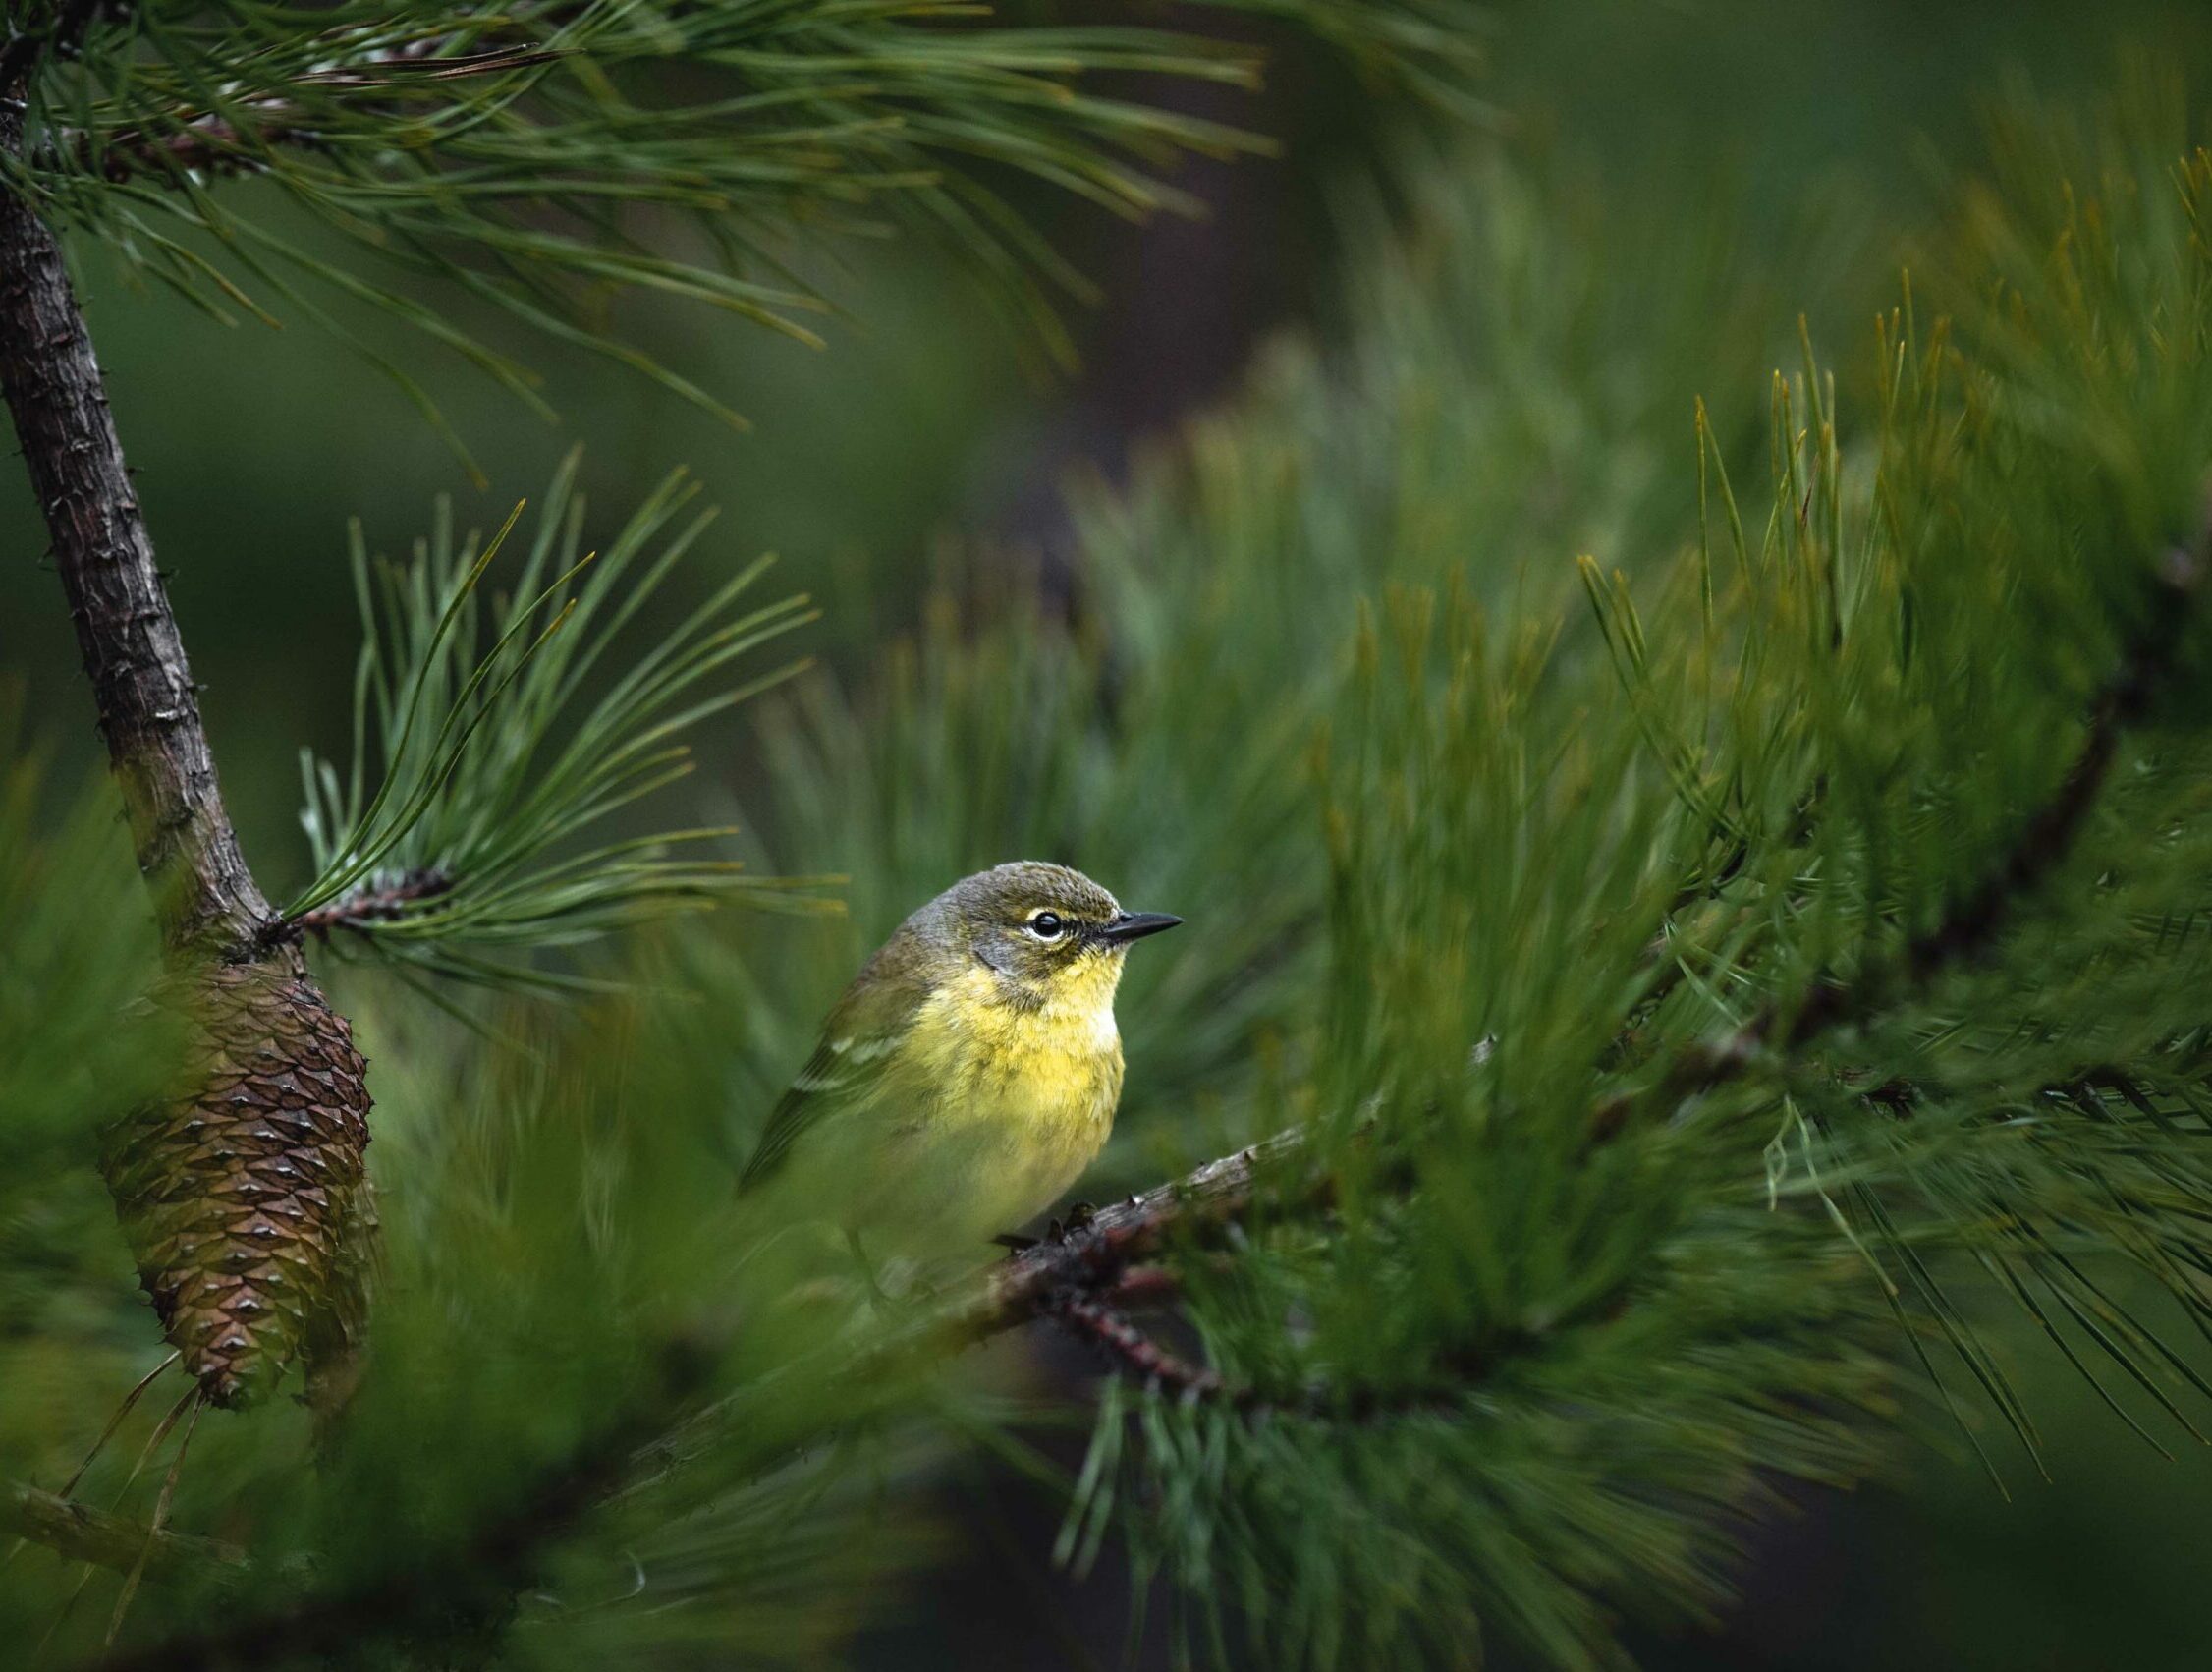 A female Pine Warbler perched in a vibrant green pine tree with long needles surrounding her and a single pine cone.